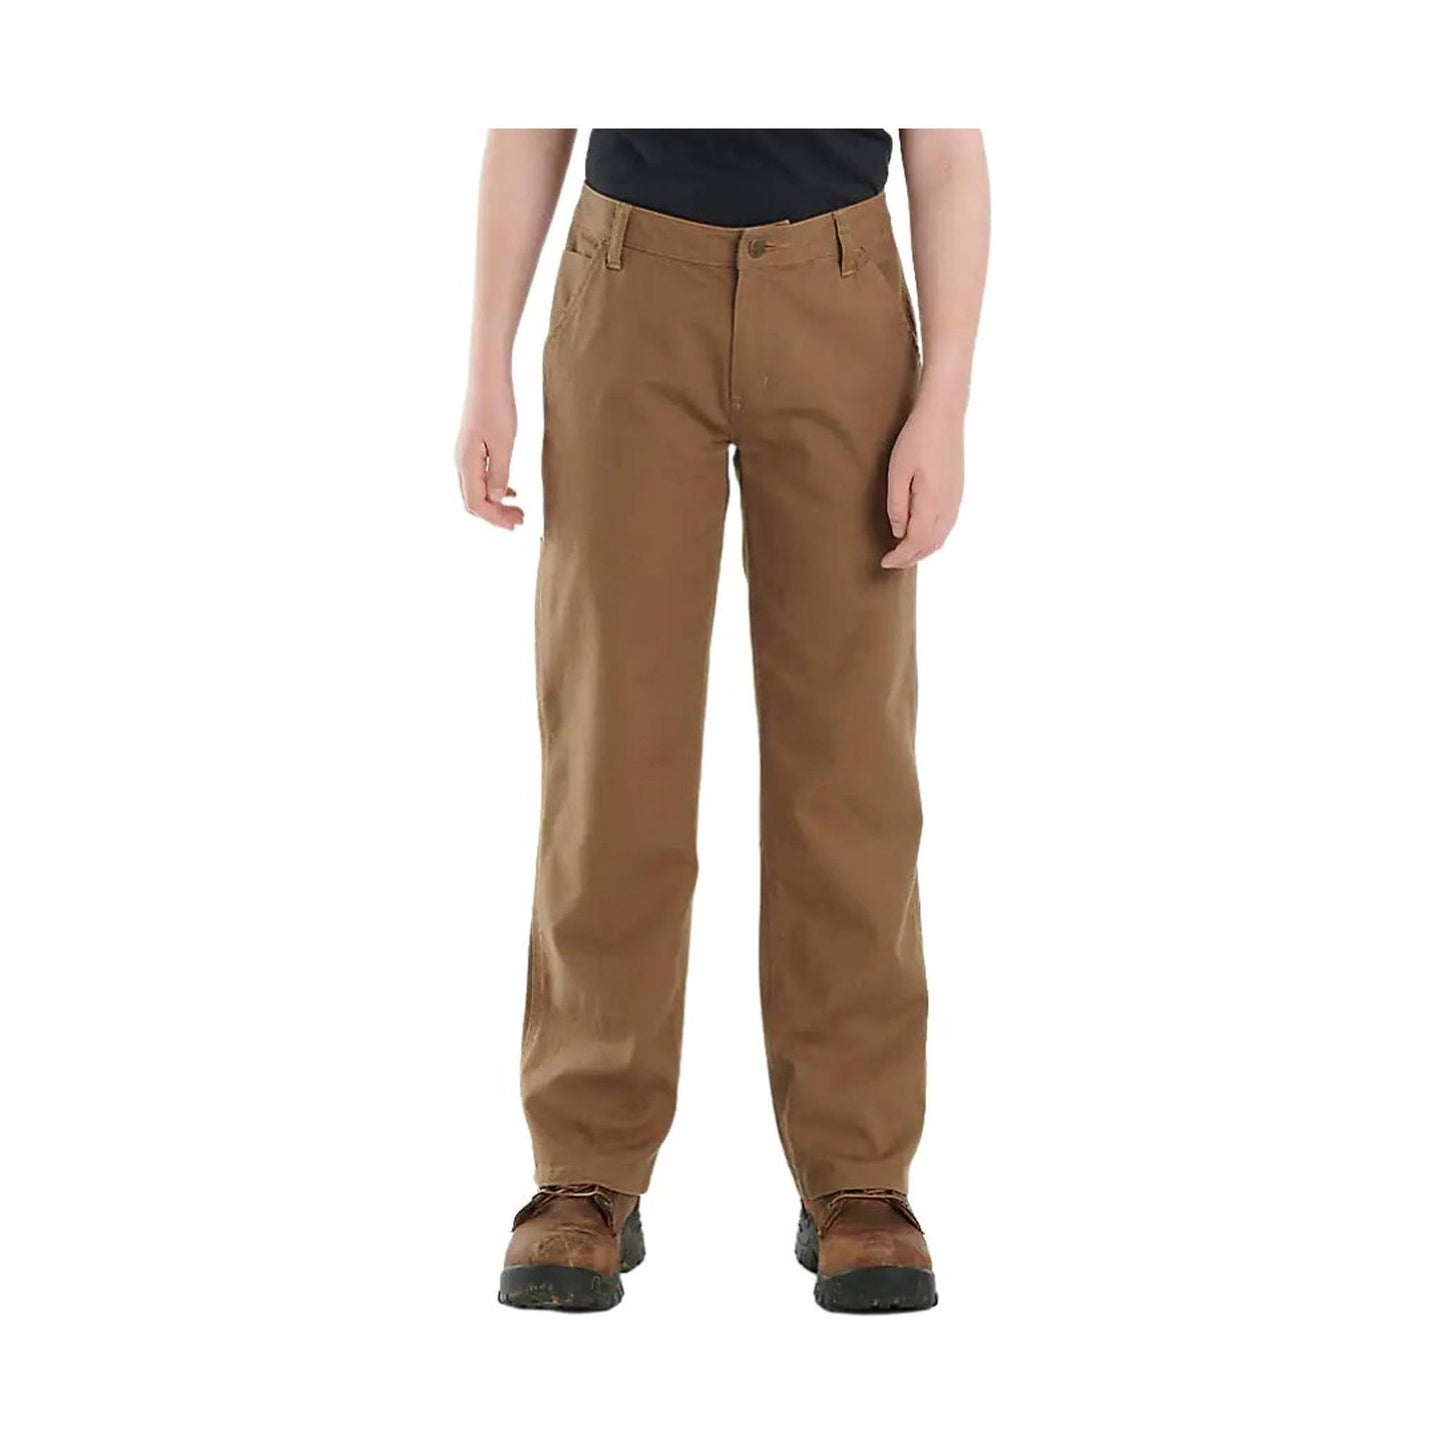 Carhartt Kids' Rugged Flex Loose Fit Utility Pant - Canyon Brown